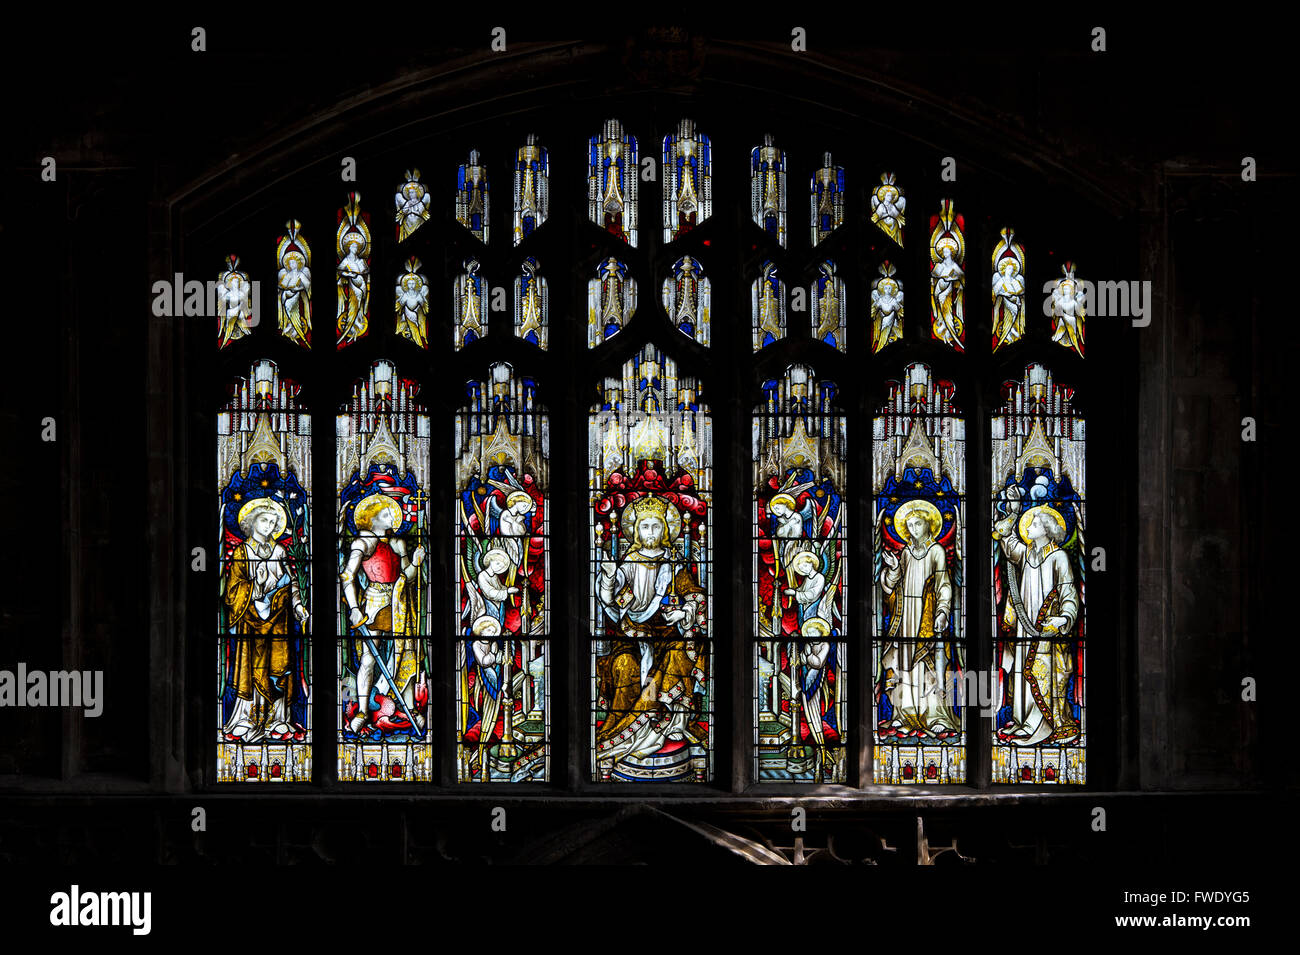 Stained glass window in St John the Baptist church, Cirencester, Gloucestershire, England Stock Photo